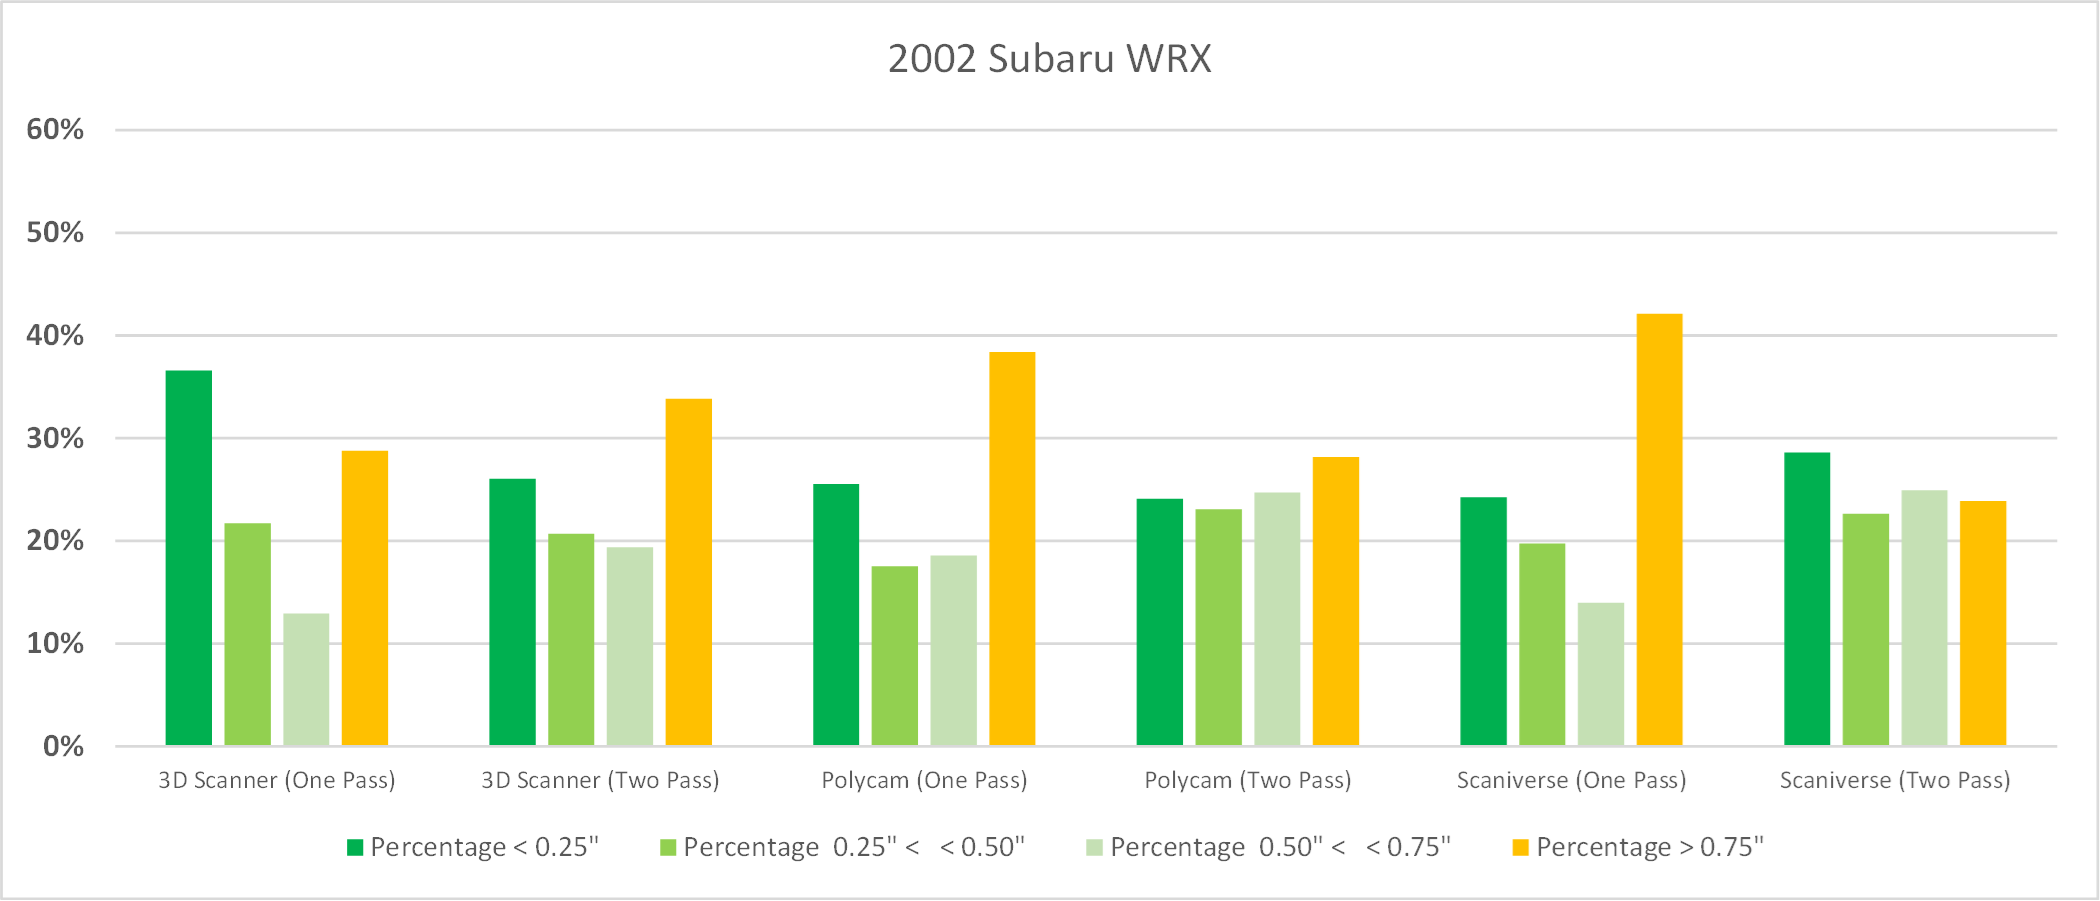 Figure 13 - A comparison chart of the Blue 2002 Subaru WRX: Percentages of points within specific distance